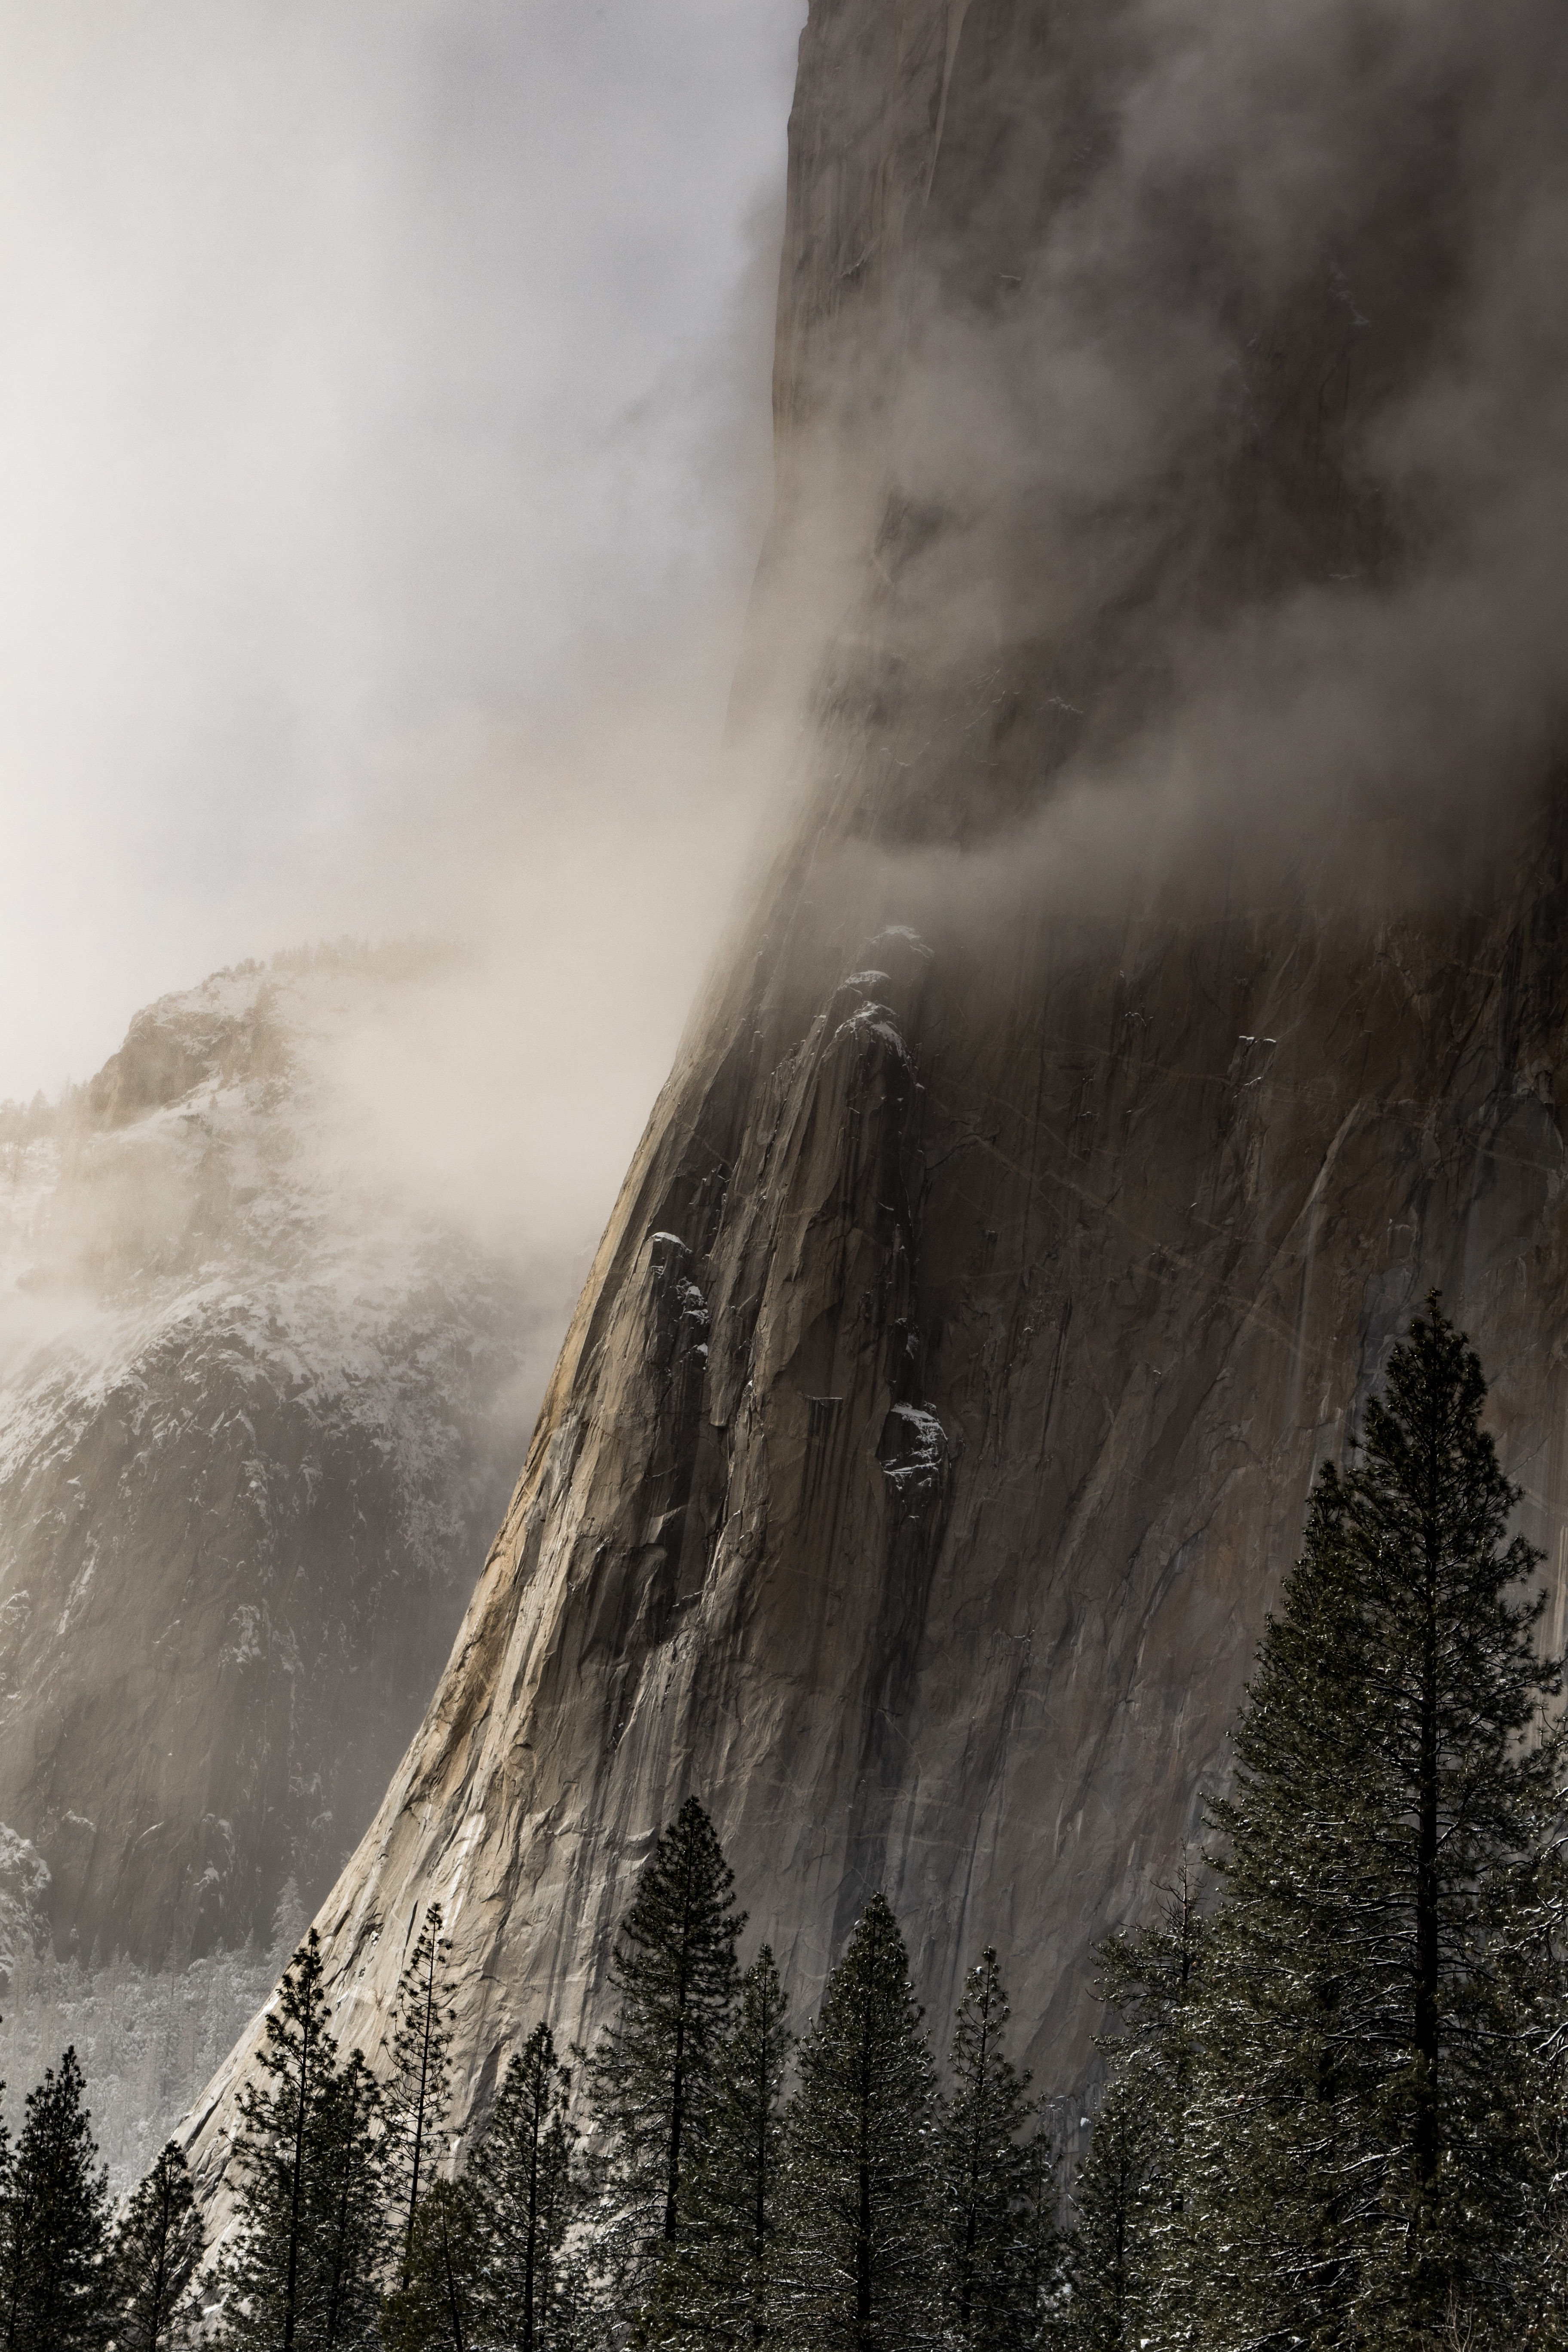 The Dawn Wall in Yosemite National Park is a tough challenge for climbers. 